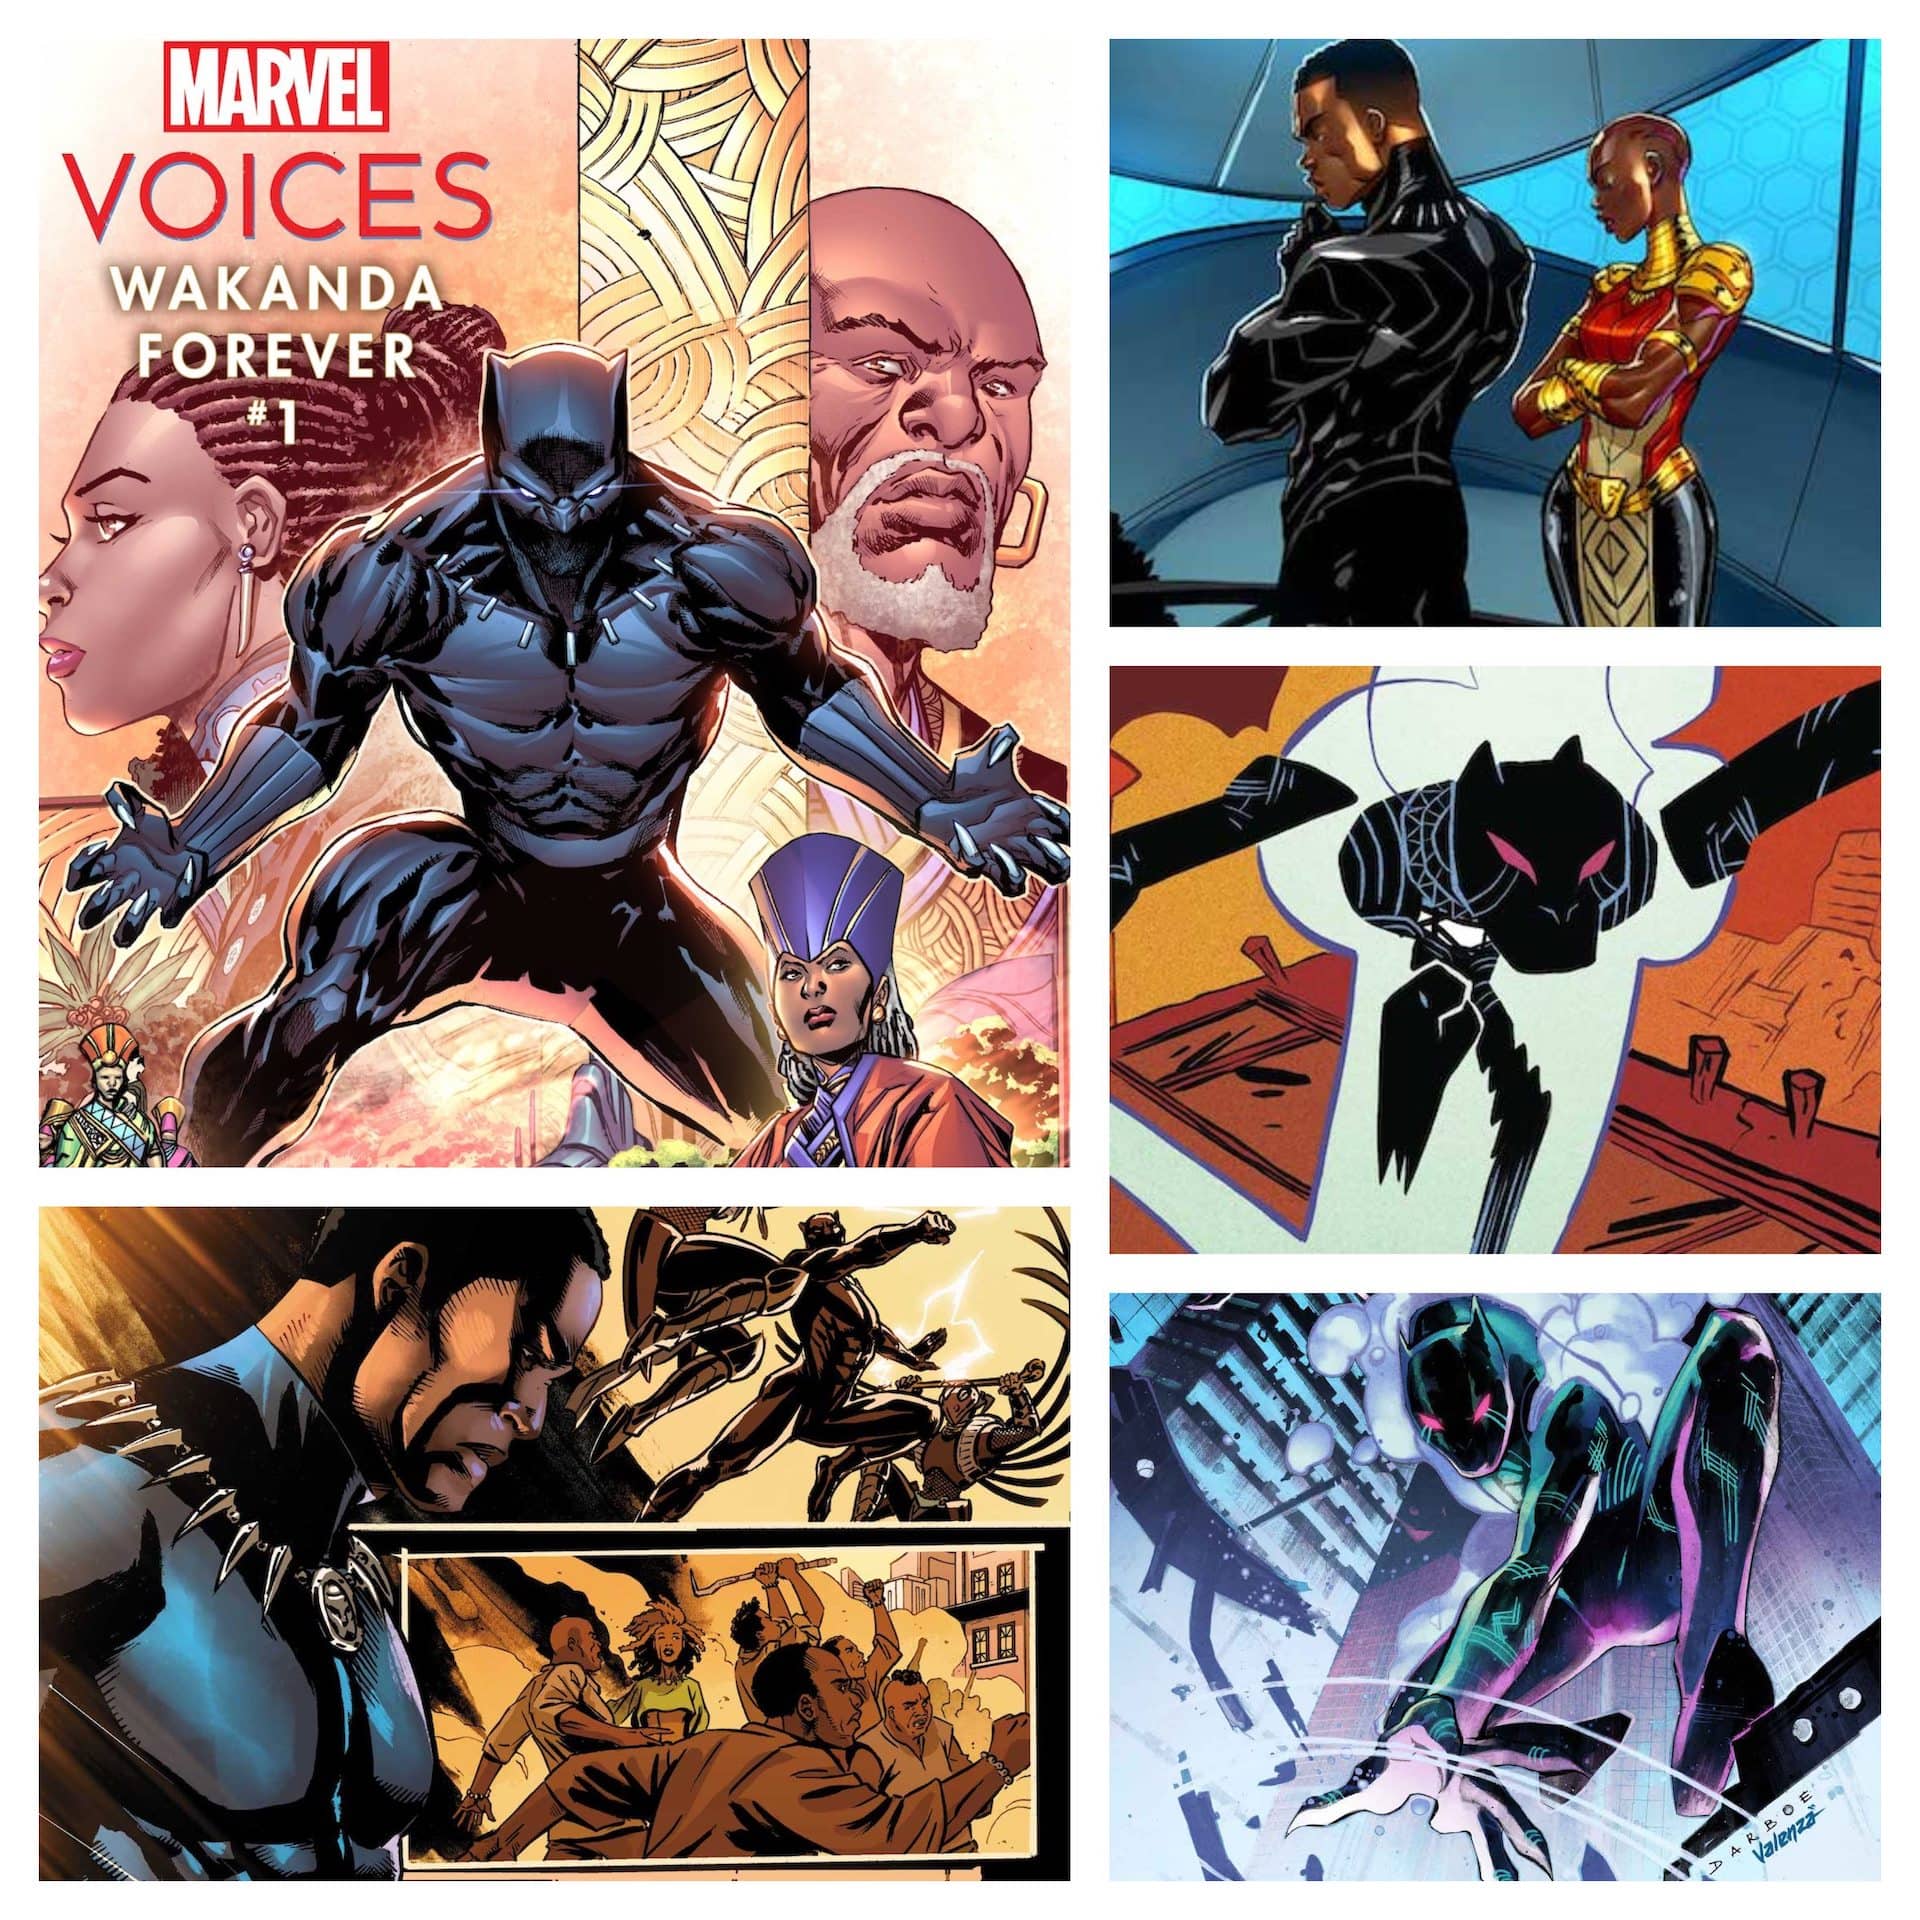 Marvel First Look: Marvel's Voices: Wakanda Forever #1